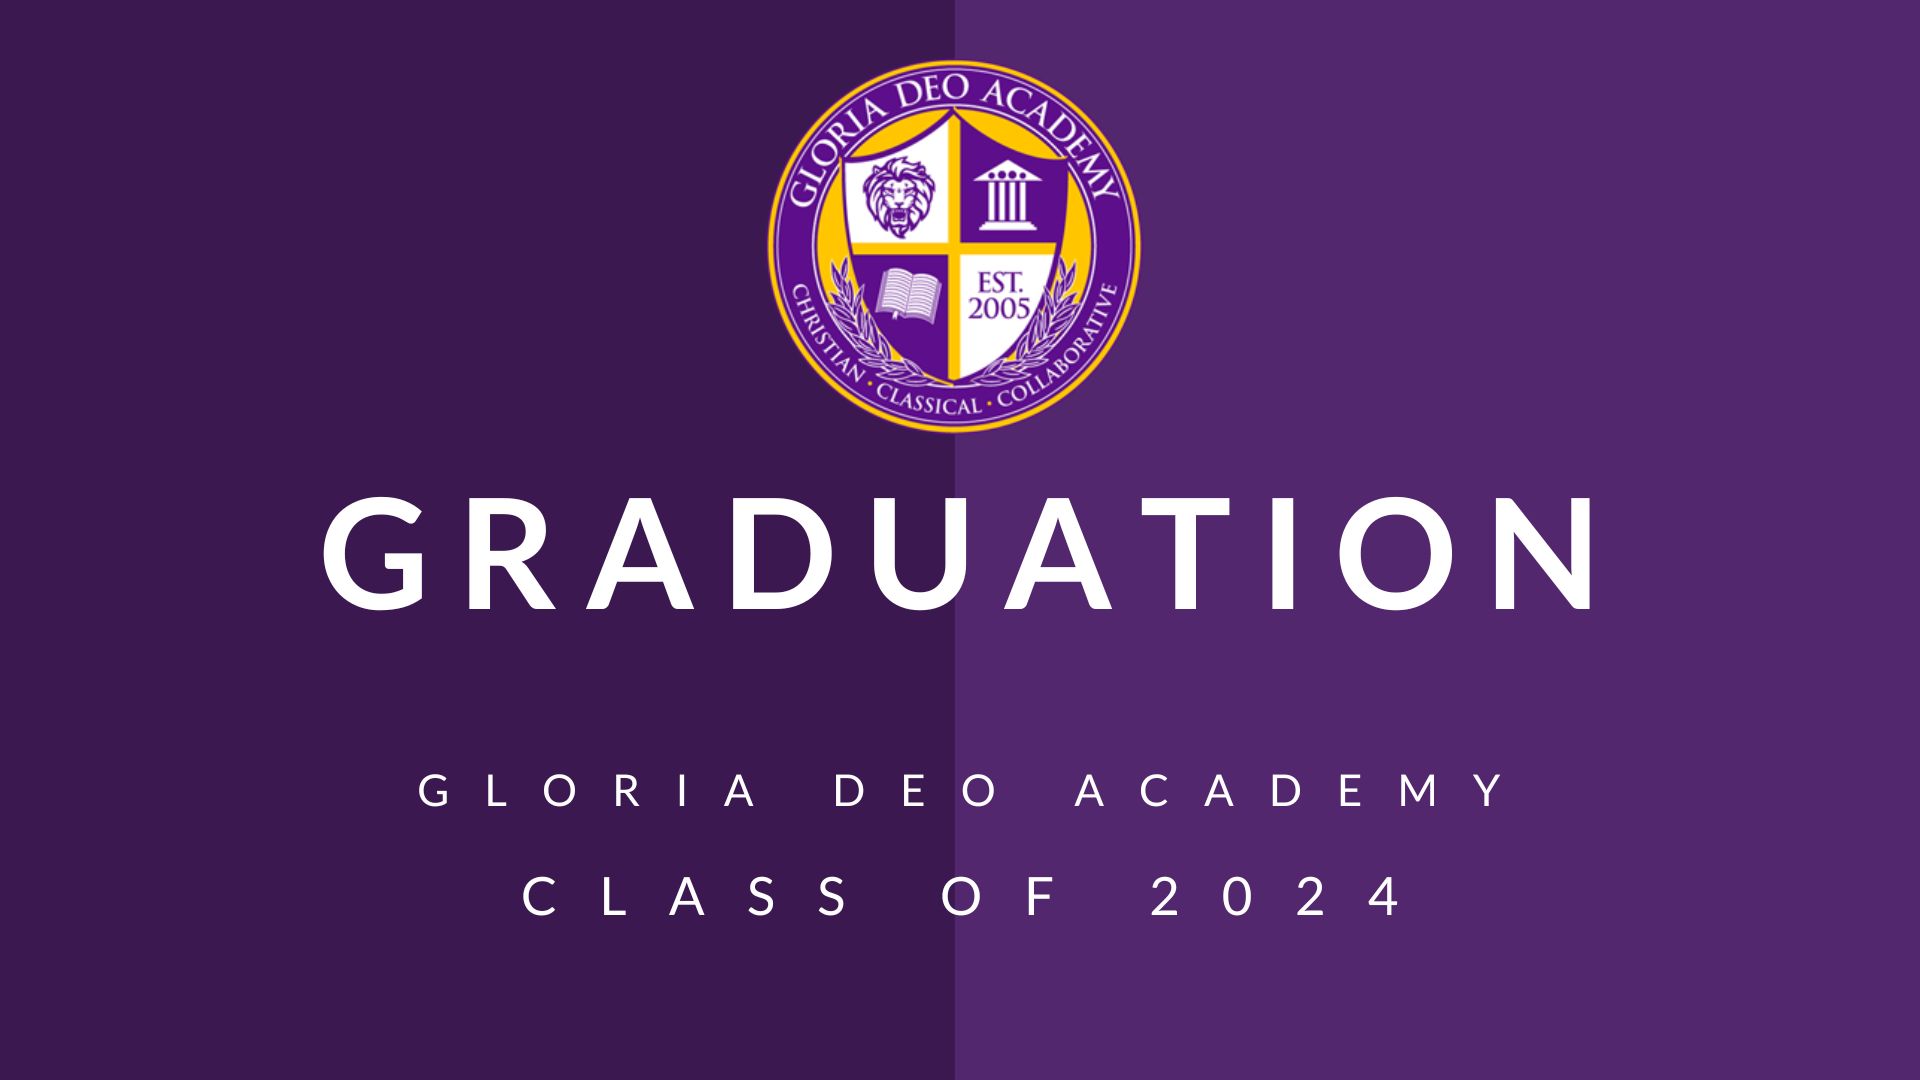 Join us to honor and celebrate Gloria Deo Academy’s Class of 2024! May 11, 3 pm at the West Building Auditorium [Golden Campus].